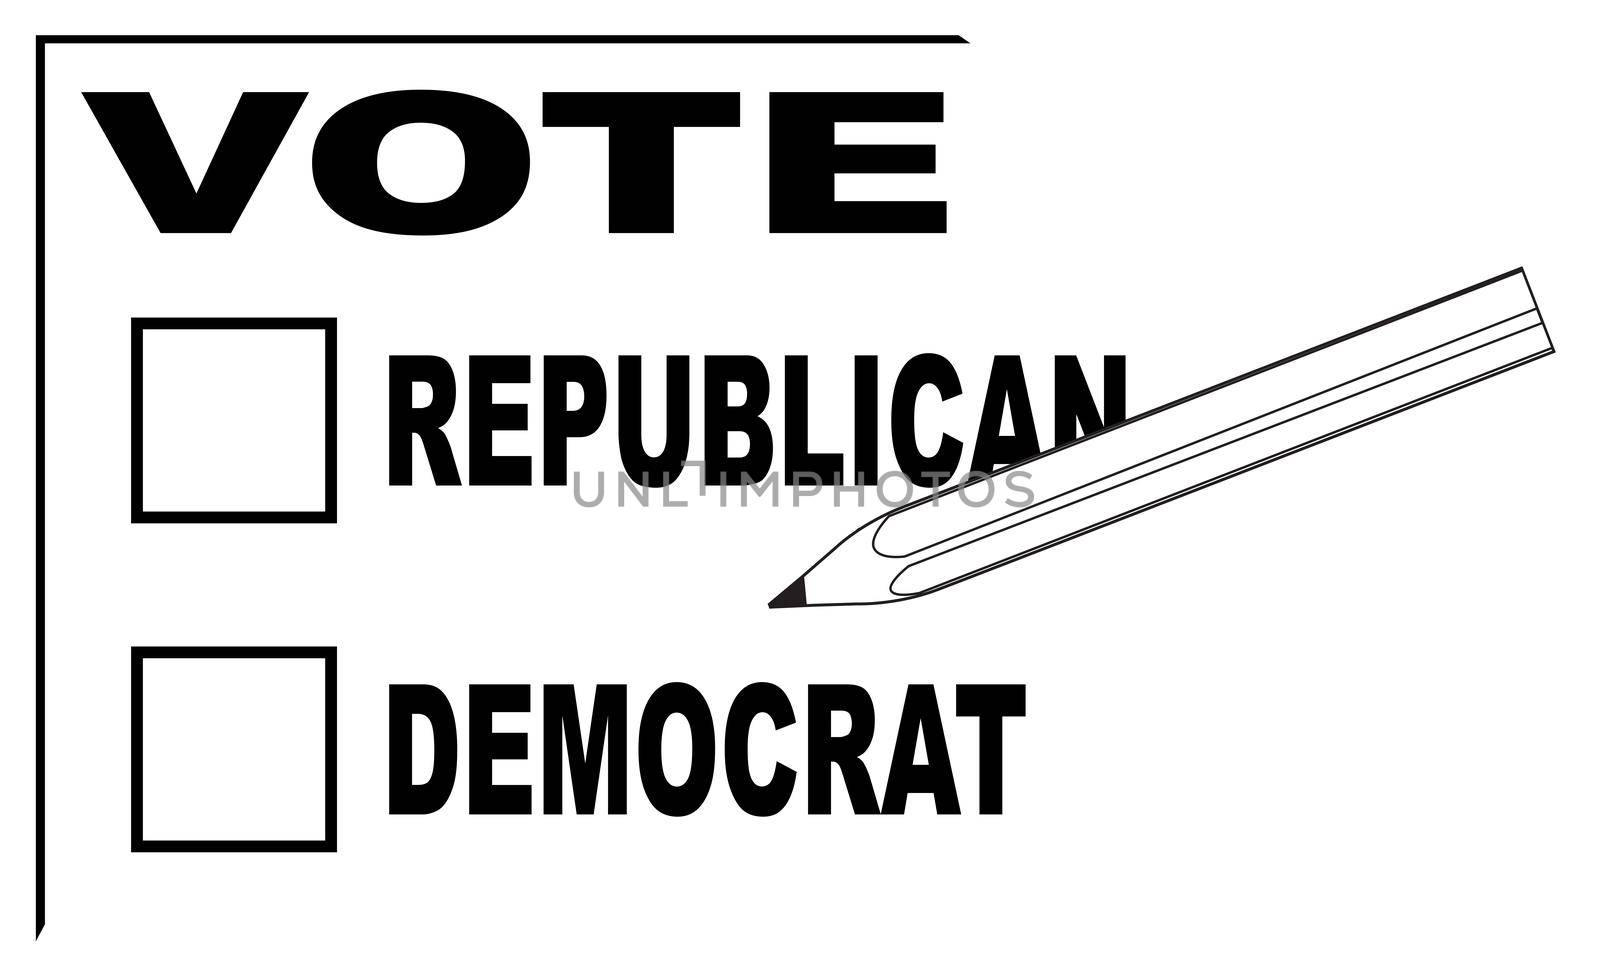 A vote slip for both Republican and Democrat with pencil